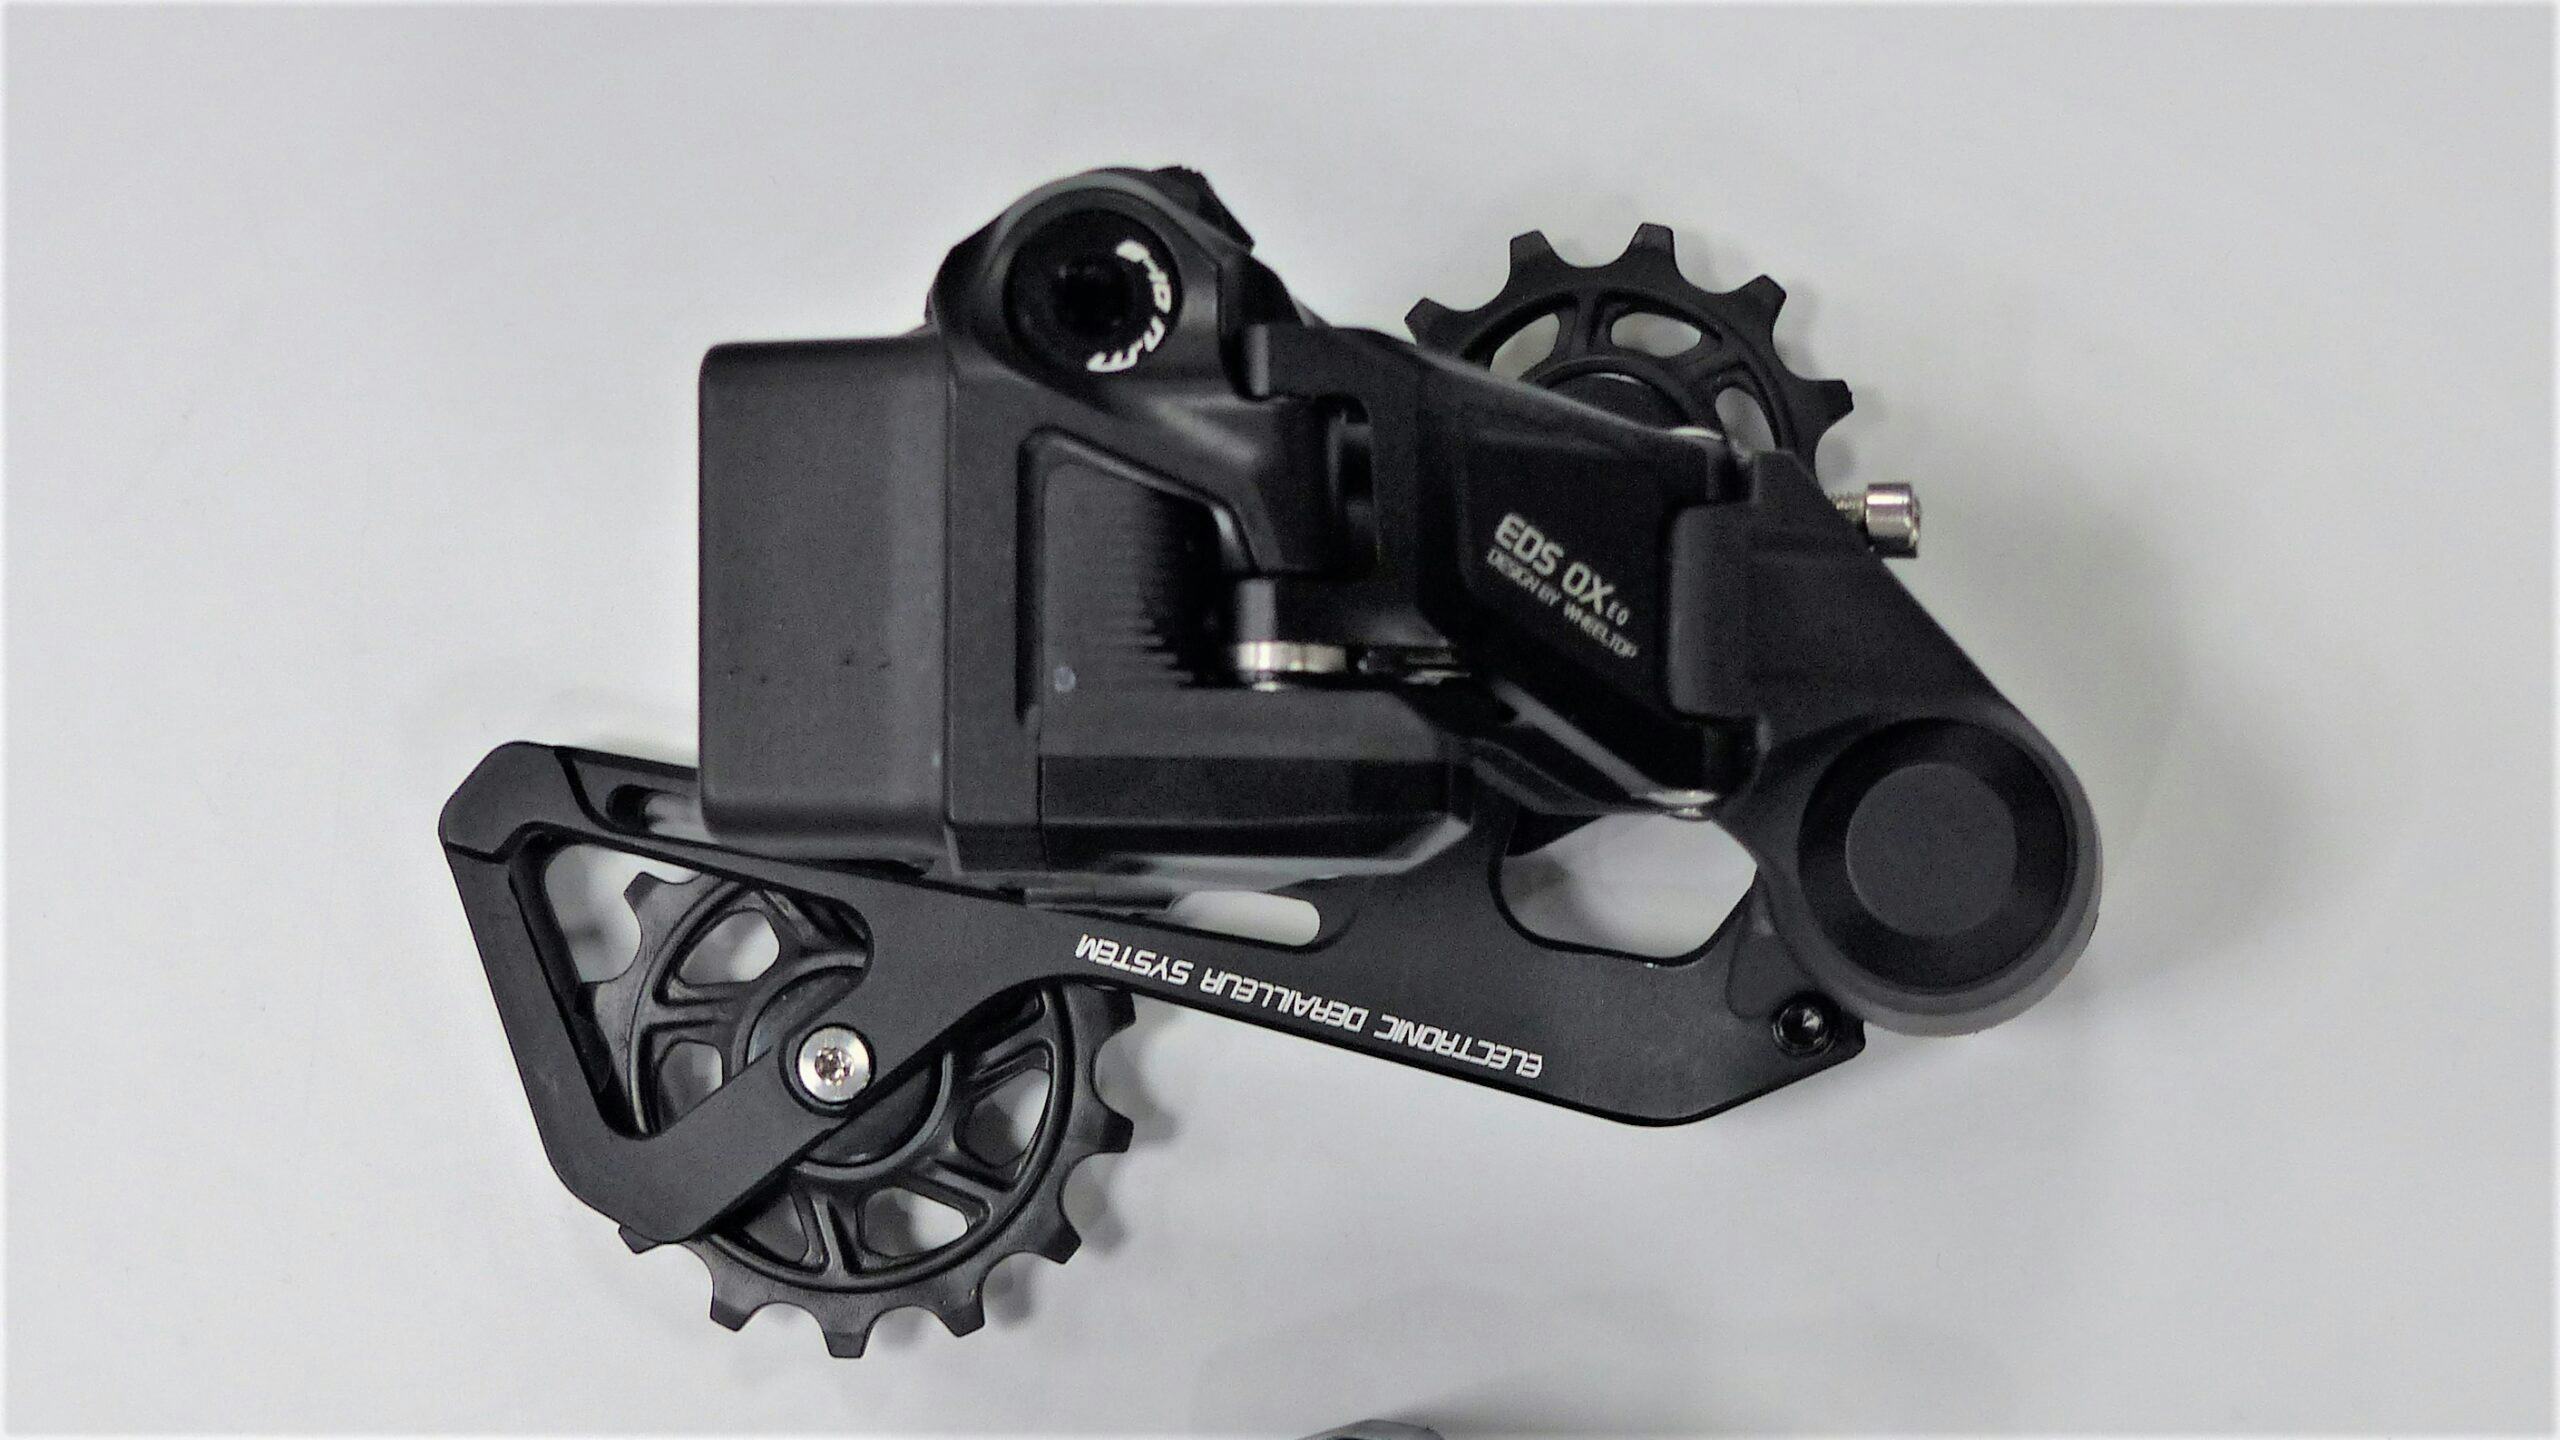 WheelTop’s EDS OX electronic derailleur system, uses a combination of both Bluetooth and NT+ protocol. – Photo Bike Europe